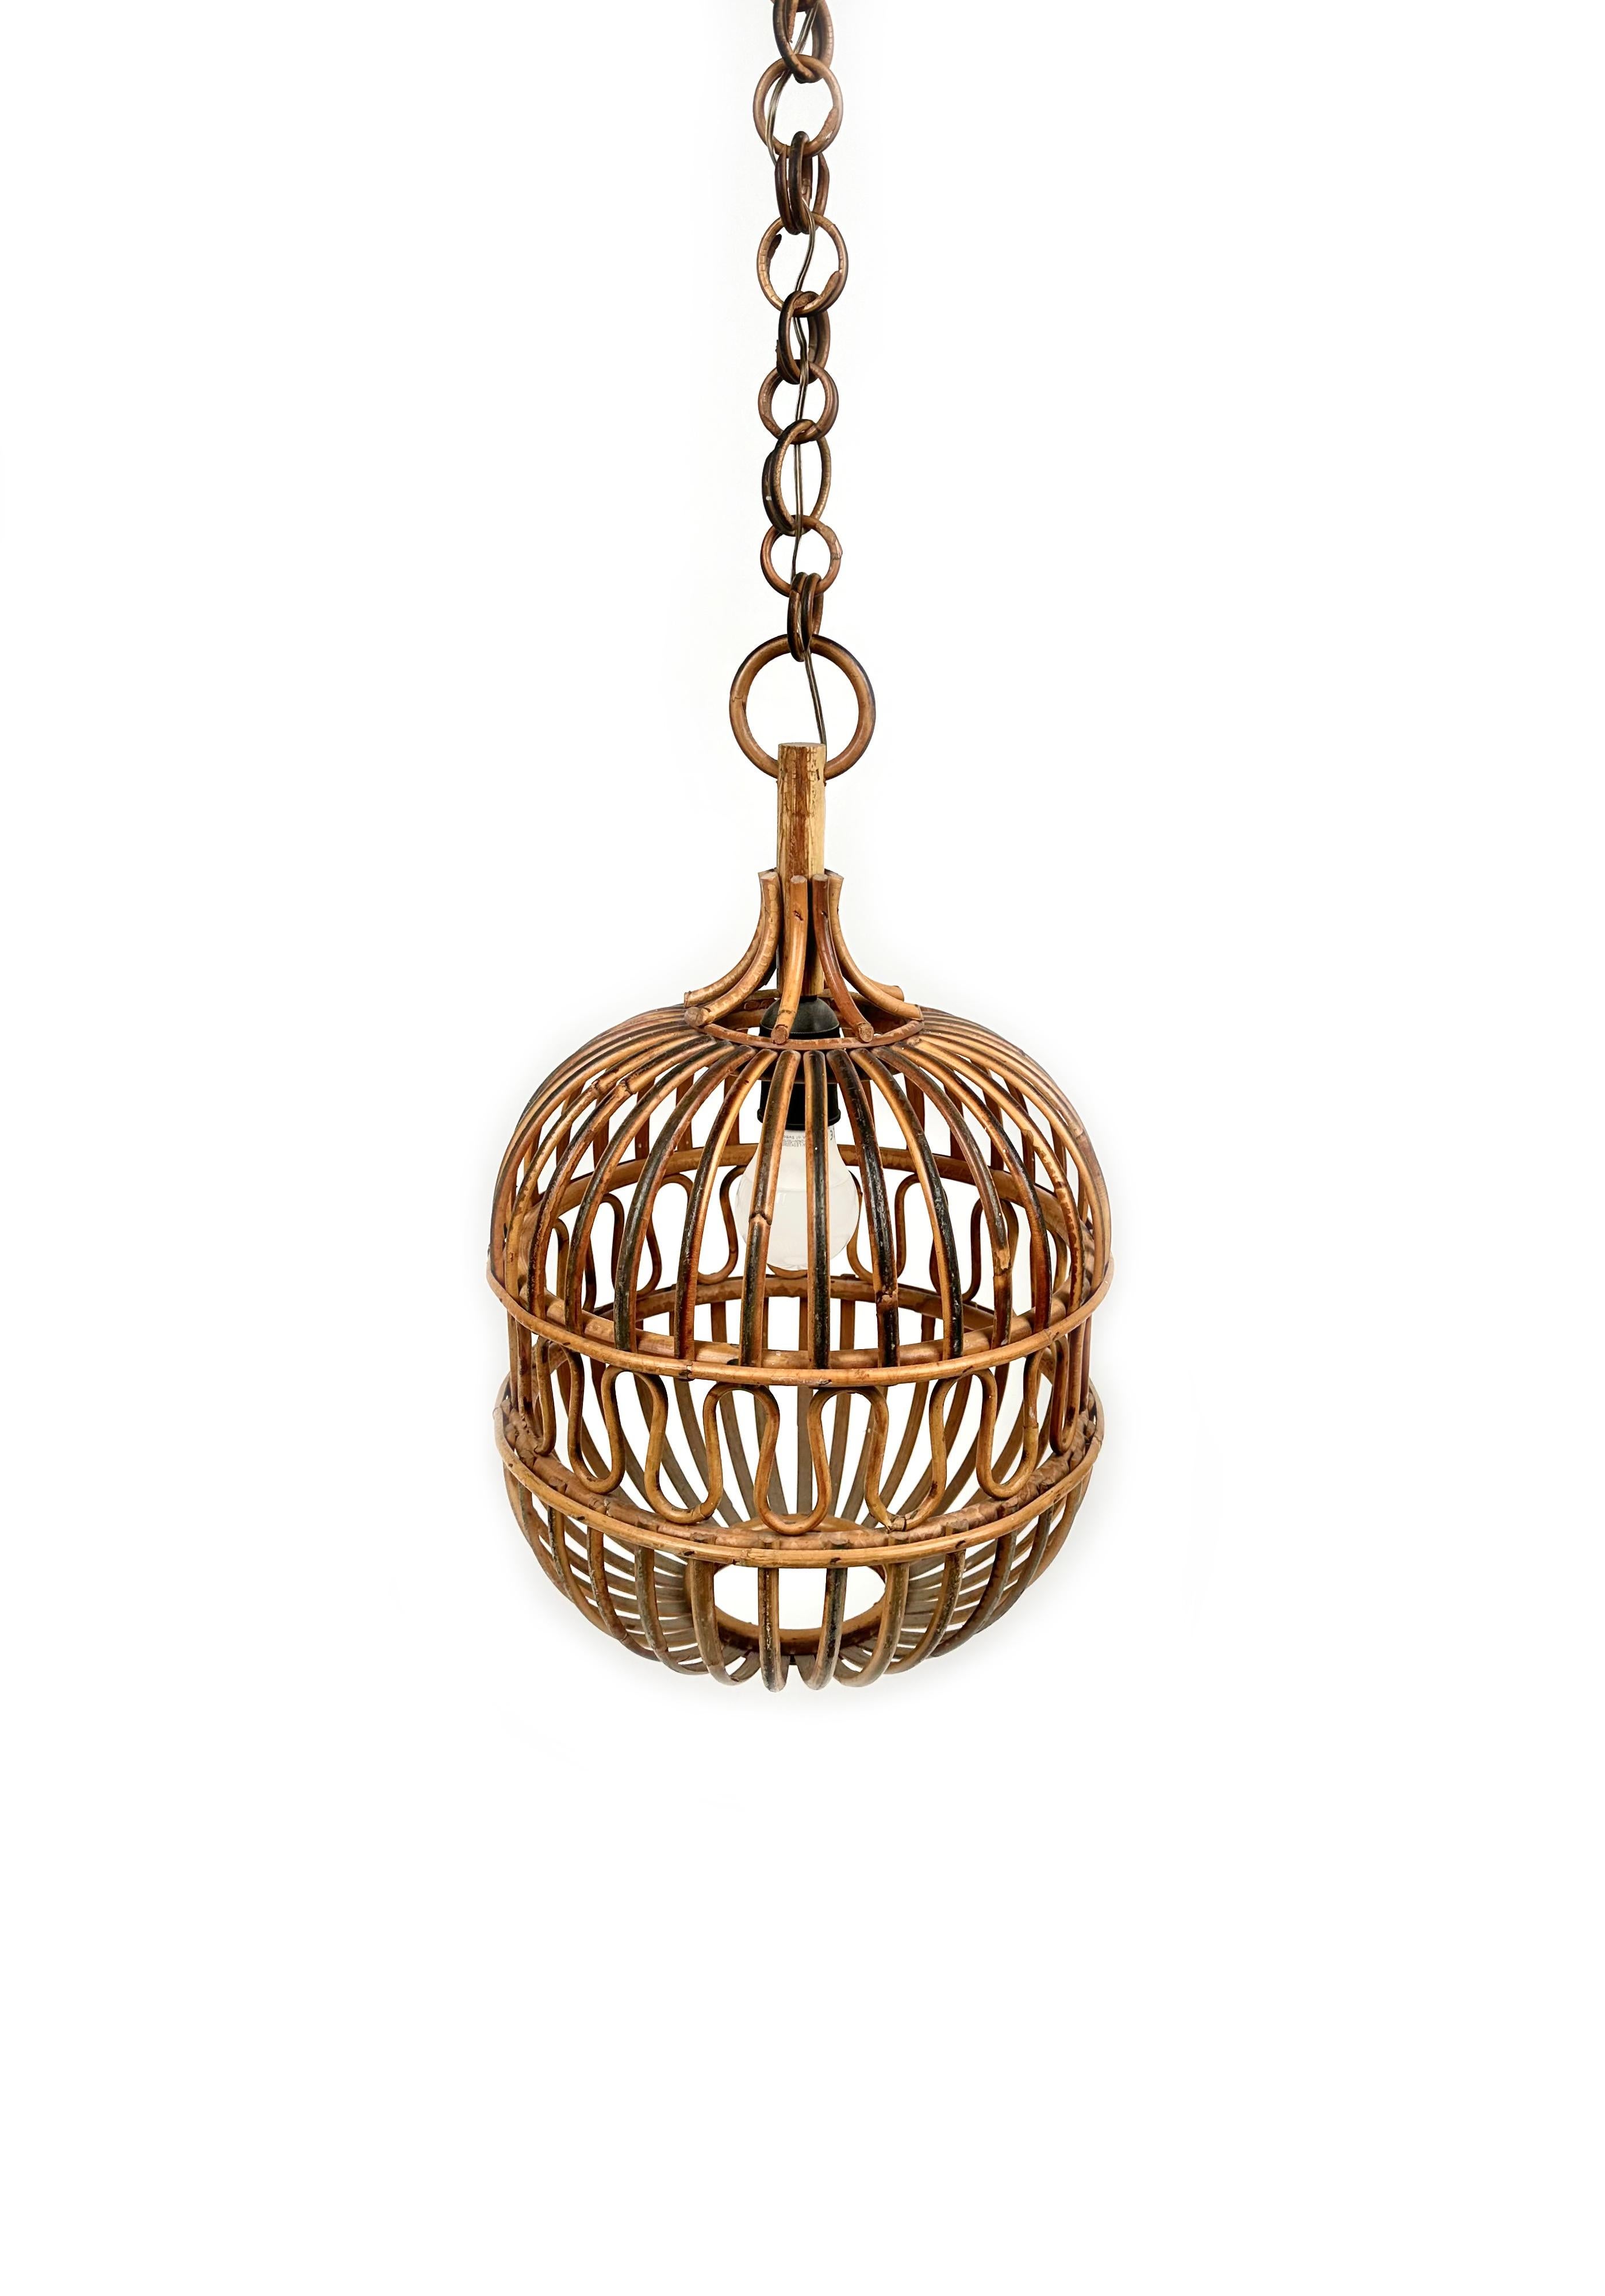 Mid-20th Century Midcentury Chandelier in Rattan and Bamboo, Italy, 1960s For Sale